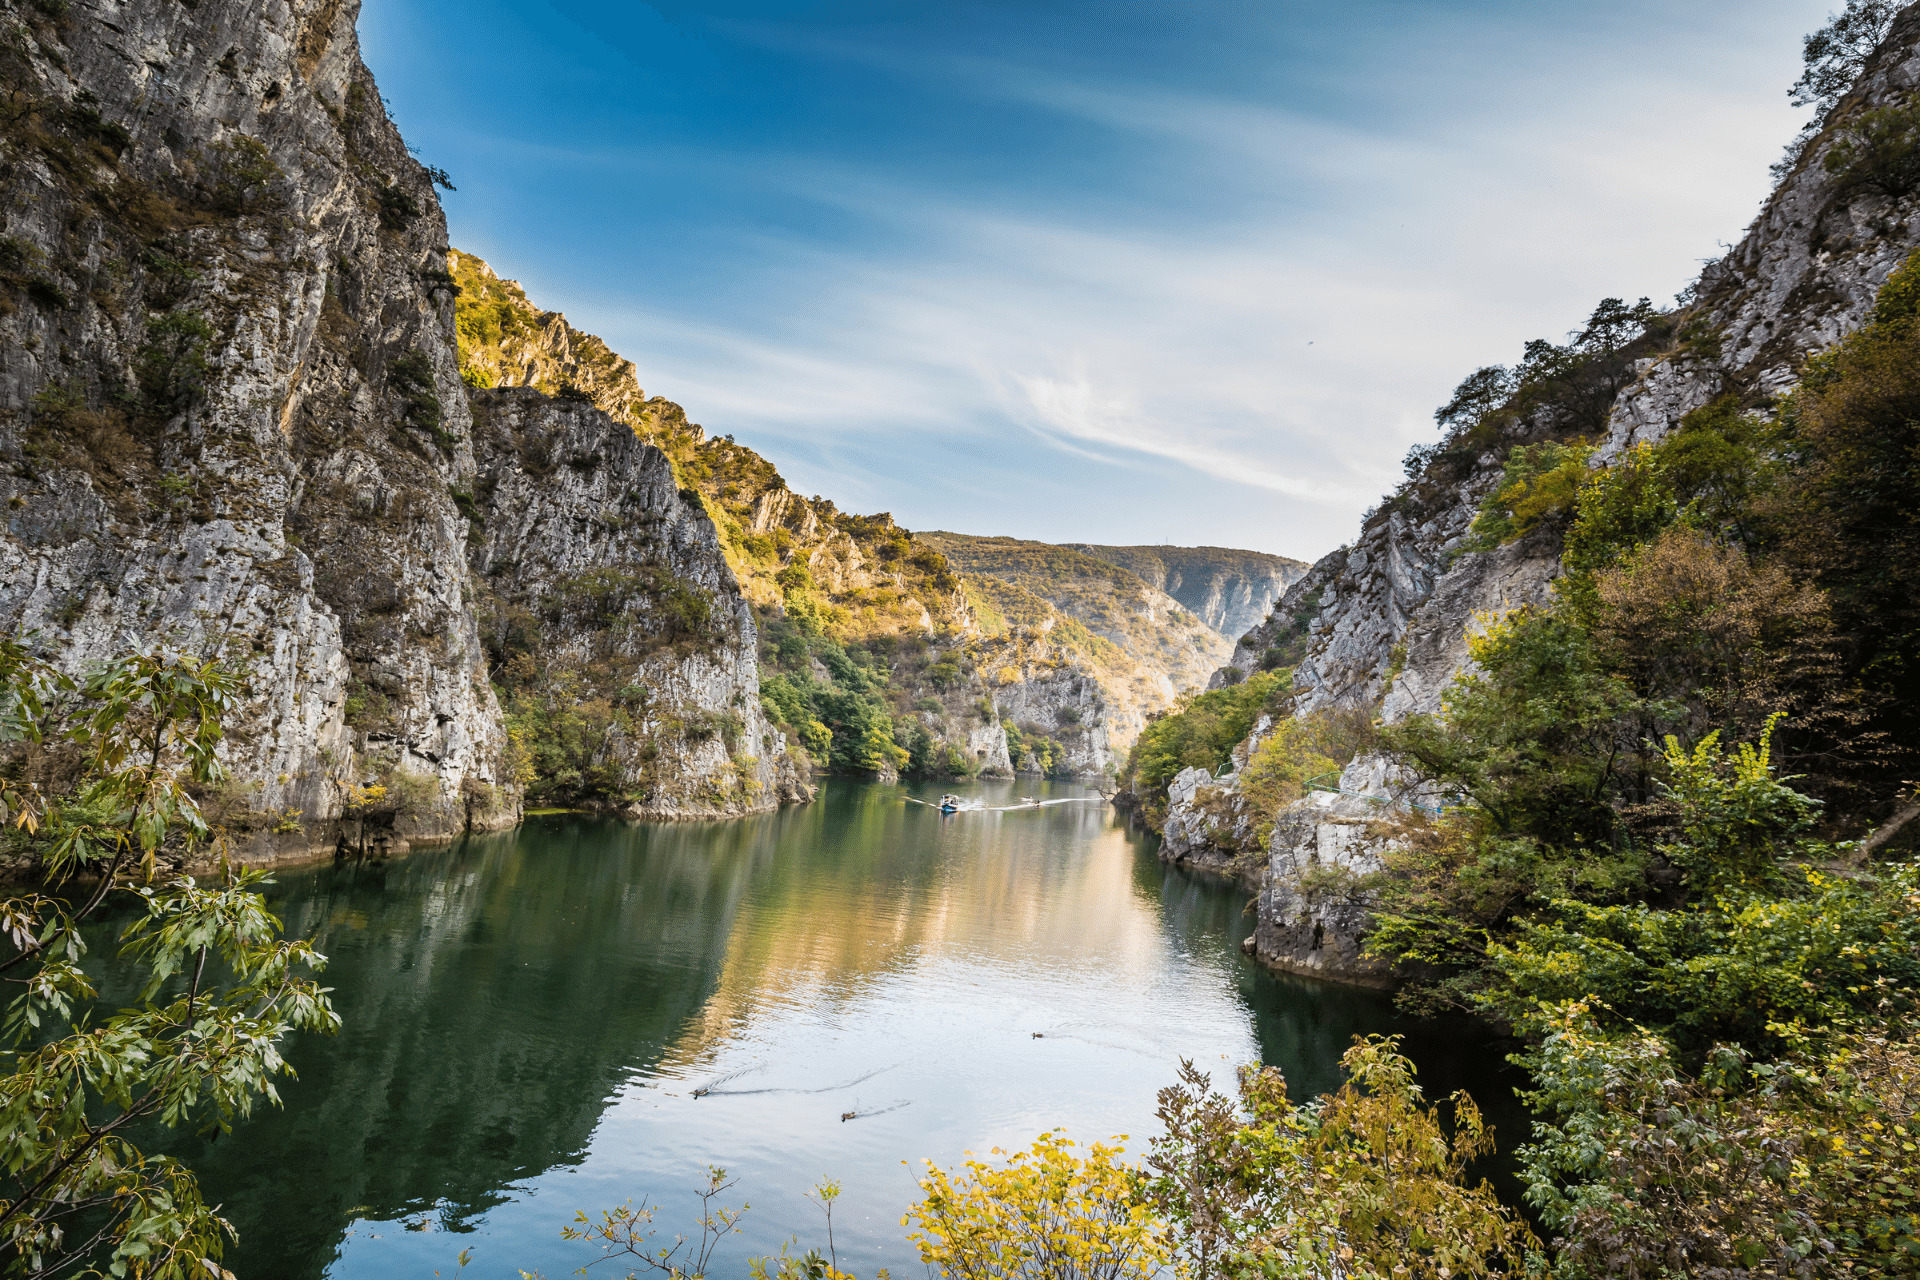 A view of the Matka Canyon in North Macedonia.